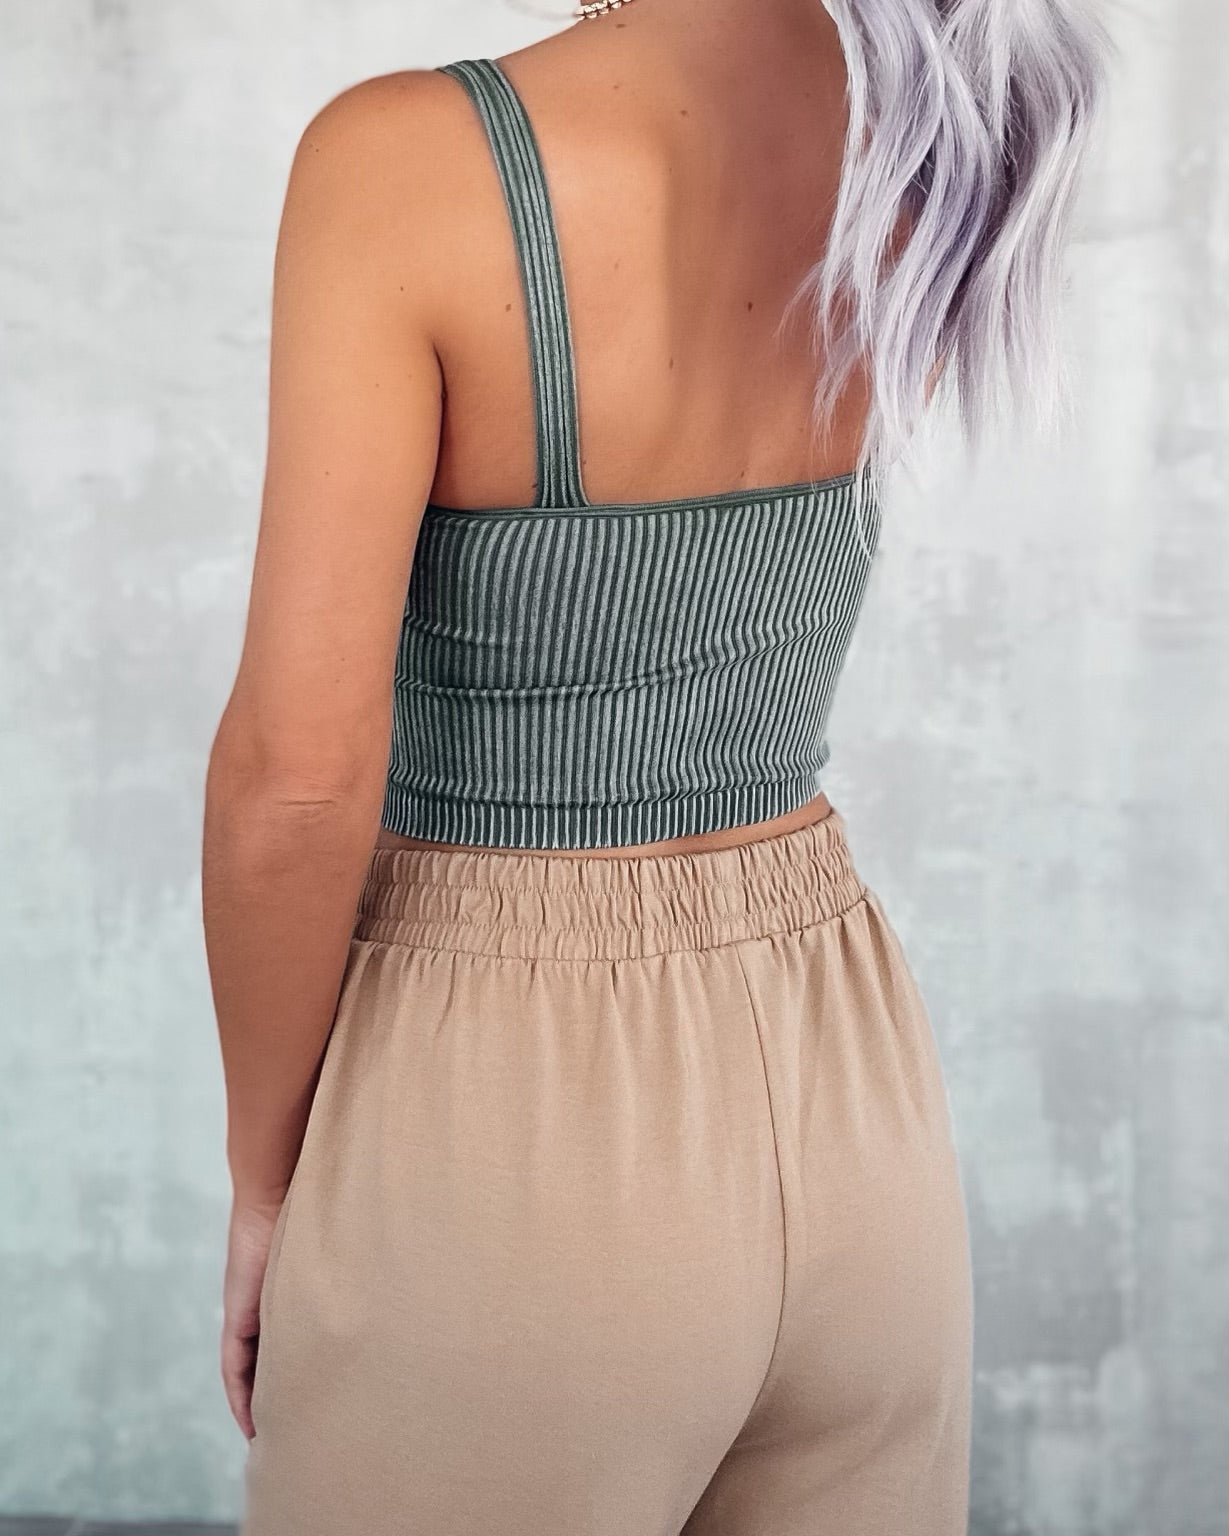 Everyday Staple V-Neck Ribbed Crop Top - Turquoise Green